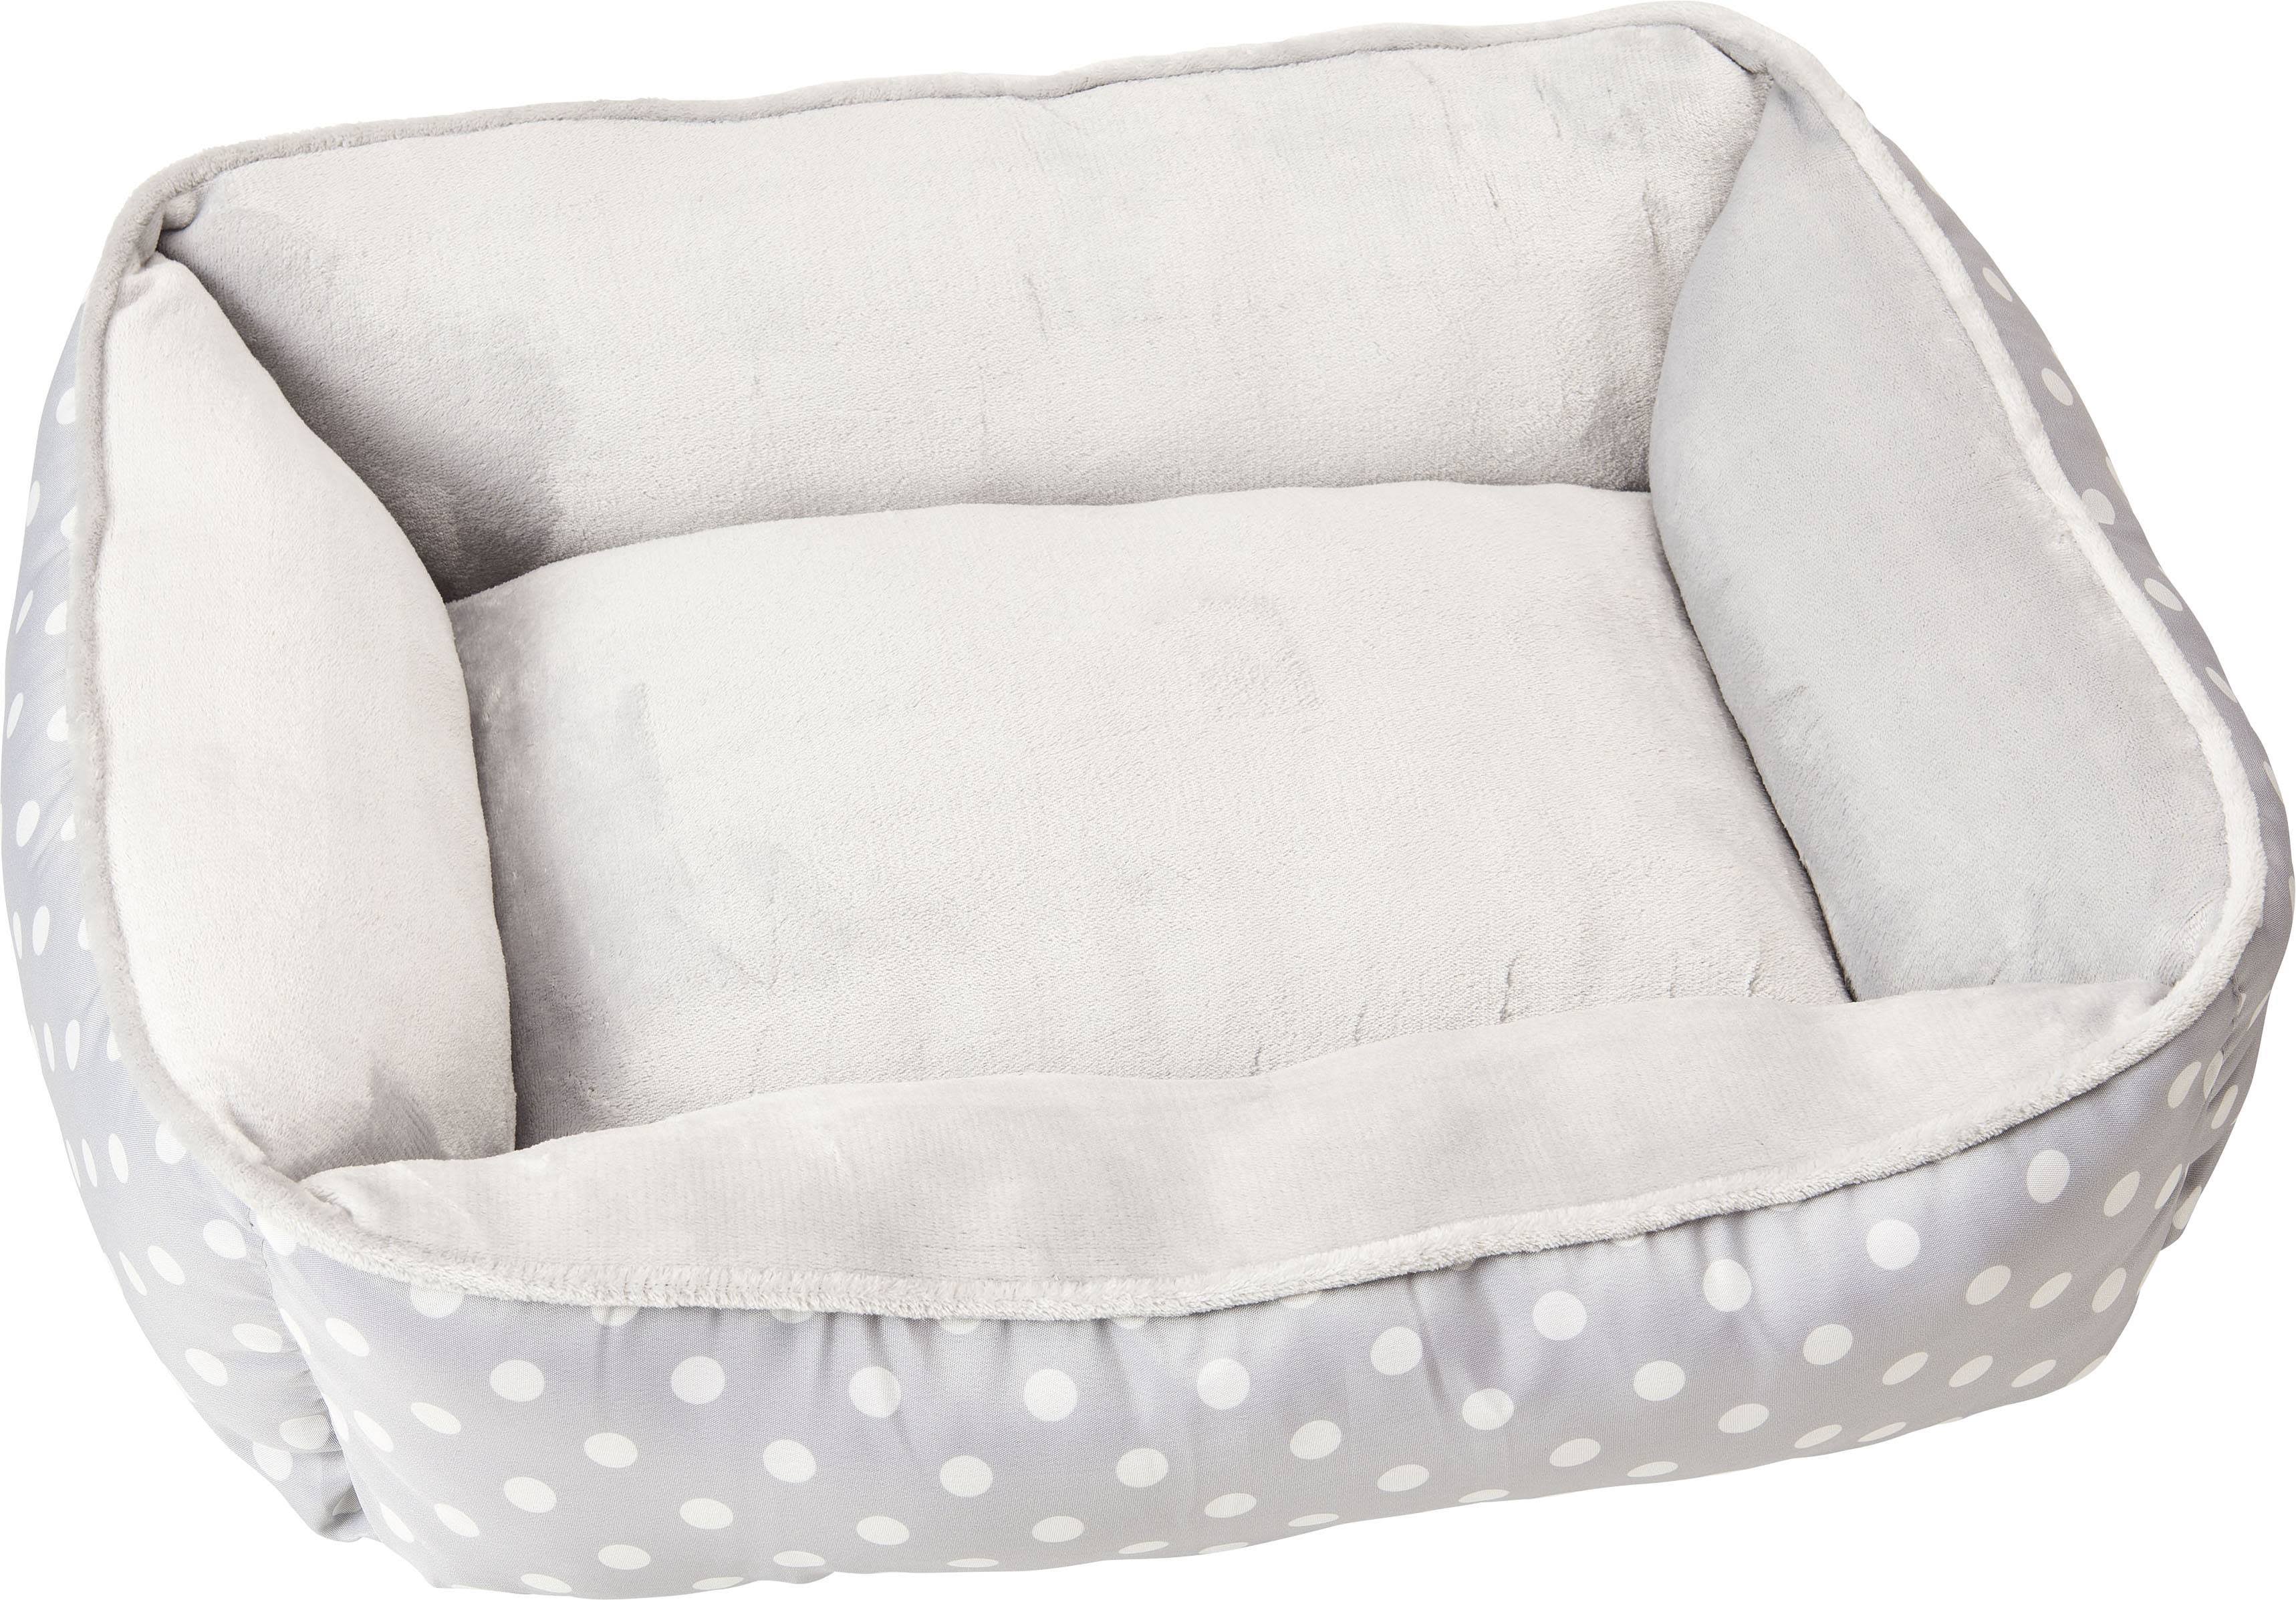 Cosmo Furbabies Polkadot Step in Dog Bed, Gray